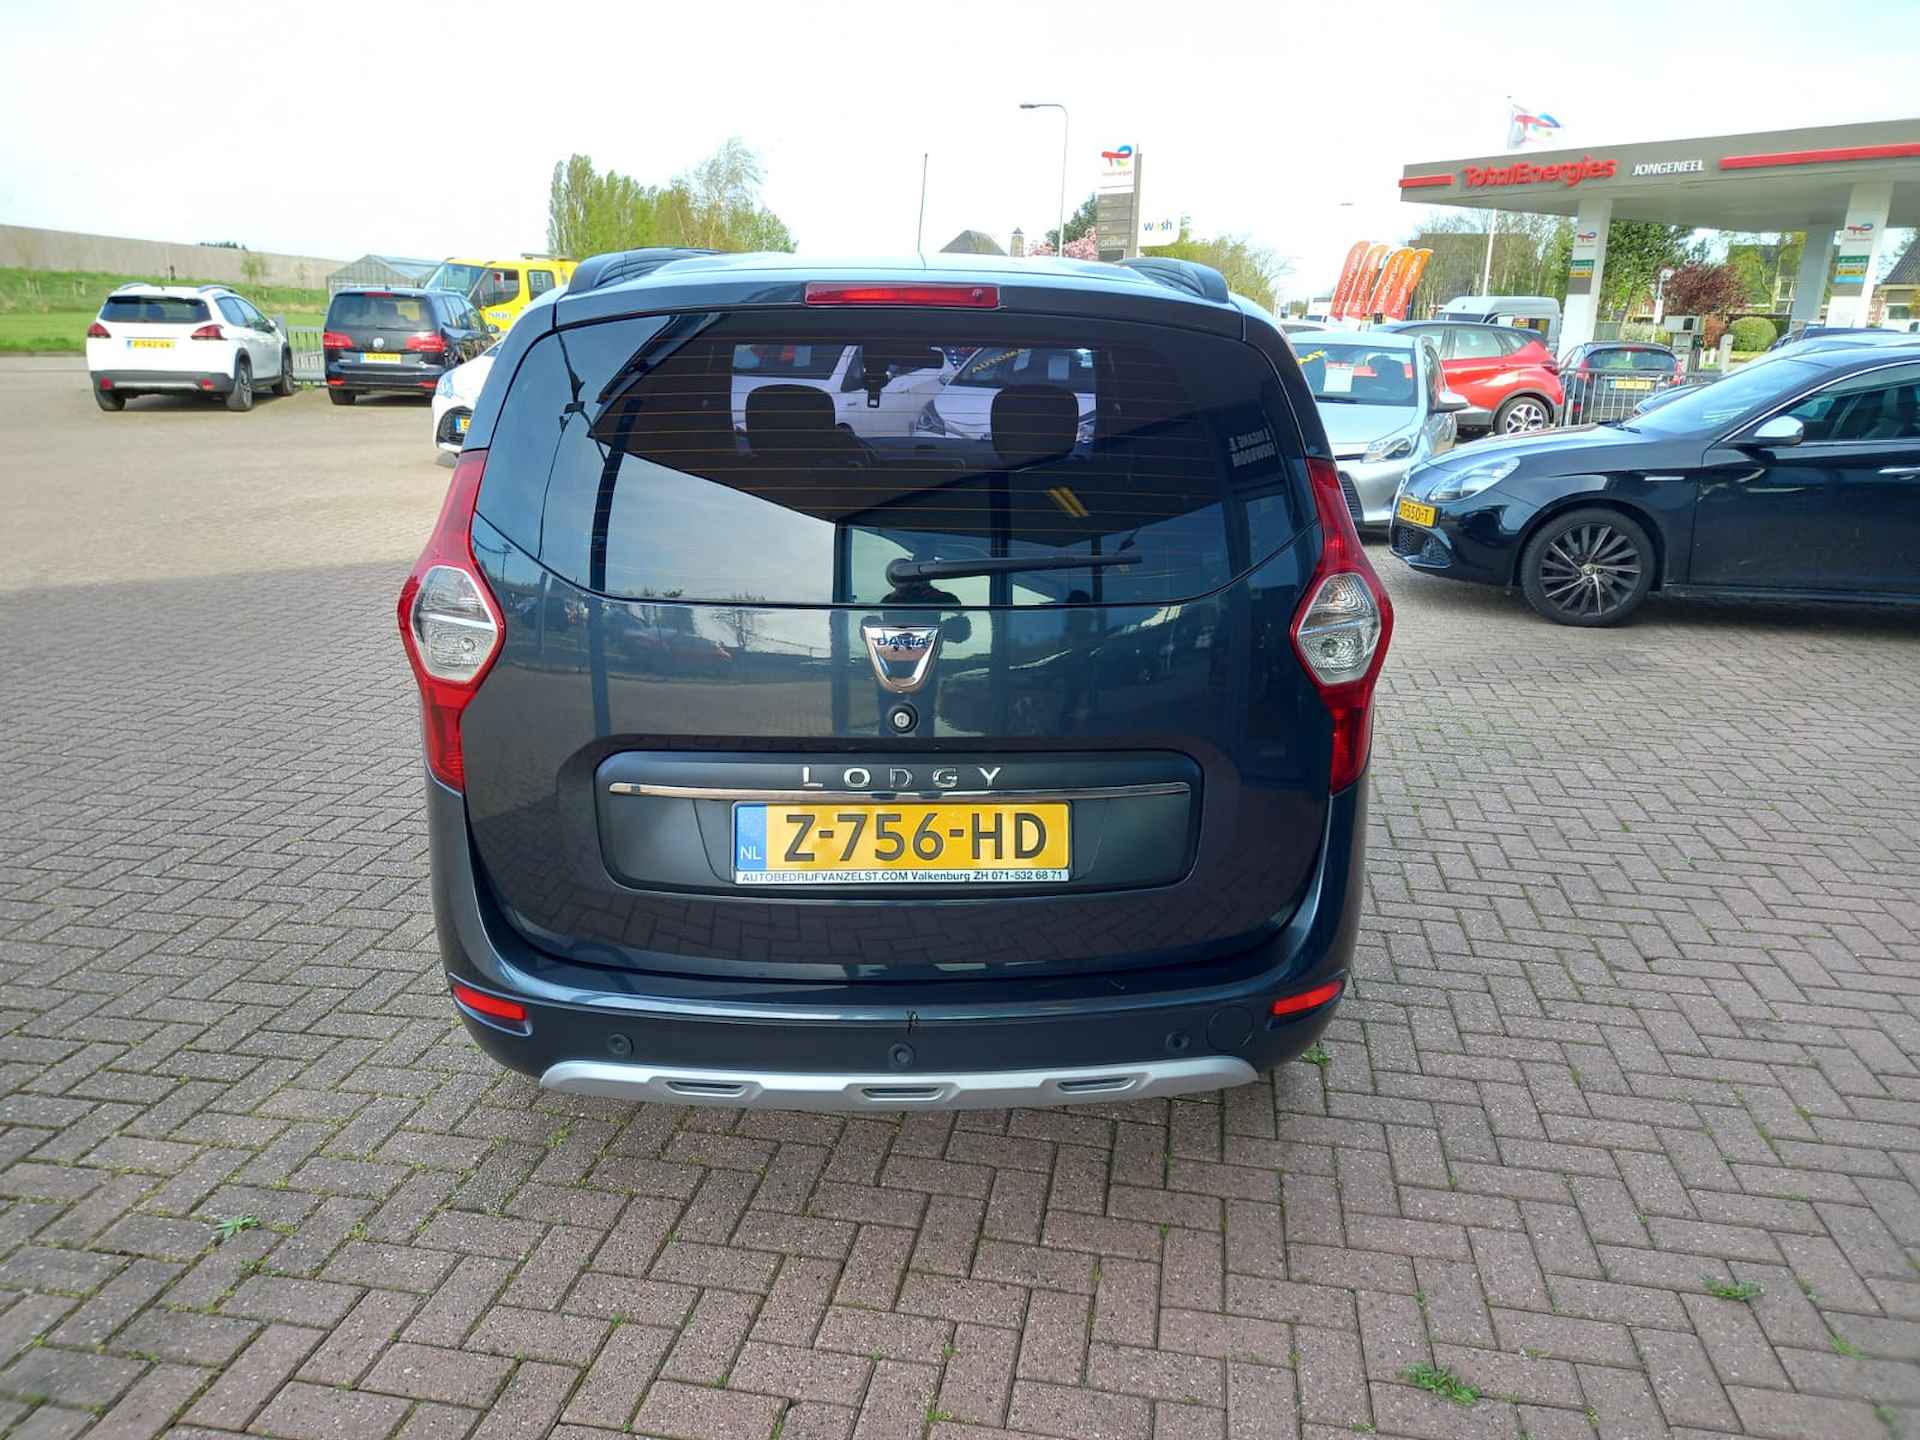 Dacia Lodgy 1.2 TCe Série Limitée Stepway 7p. Airco, Multimedia systeem, Navigatie, Cruise control, Bluetooth telefoonverbinding, Parkeersen Nette auto, BOVAG - 7/27